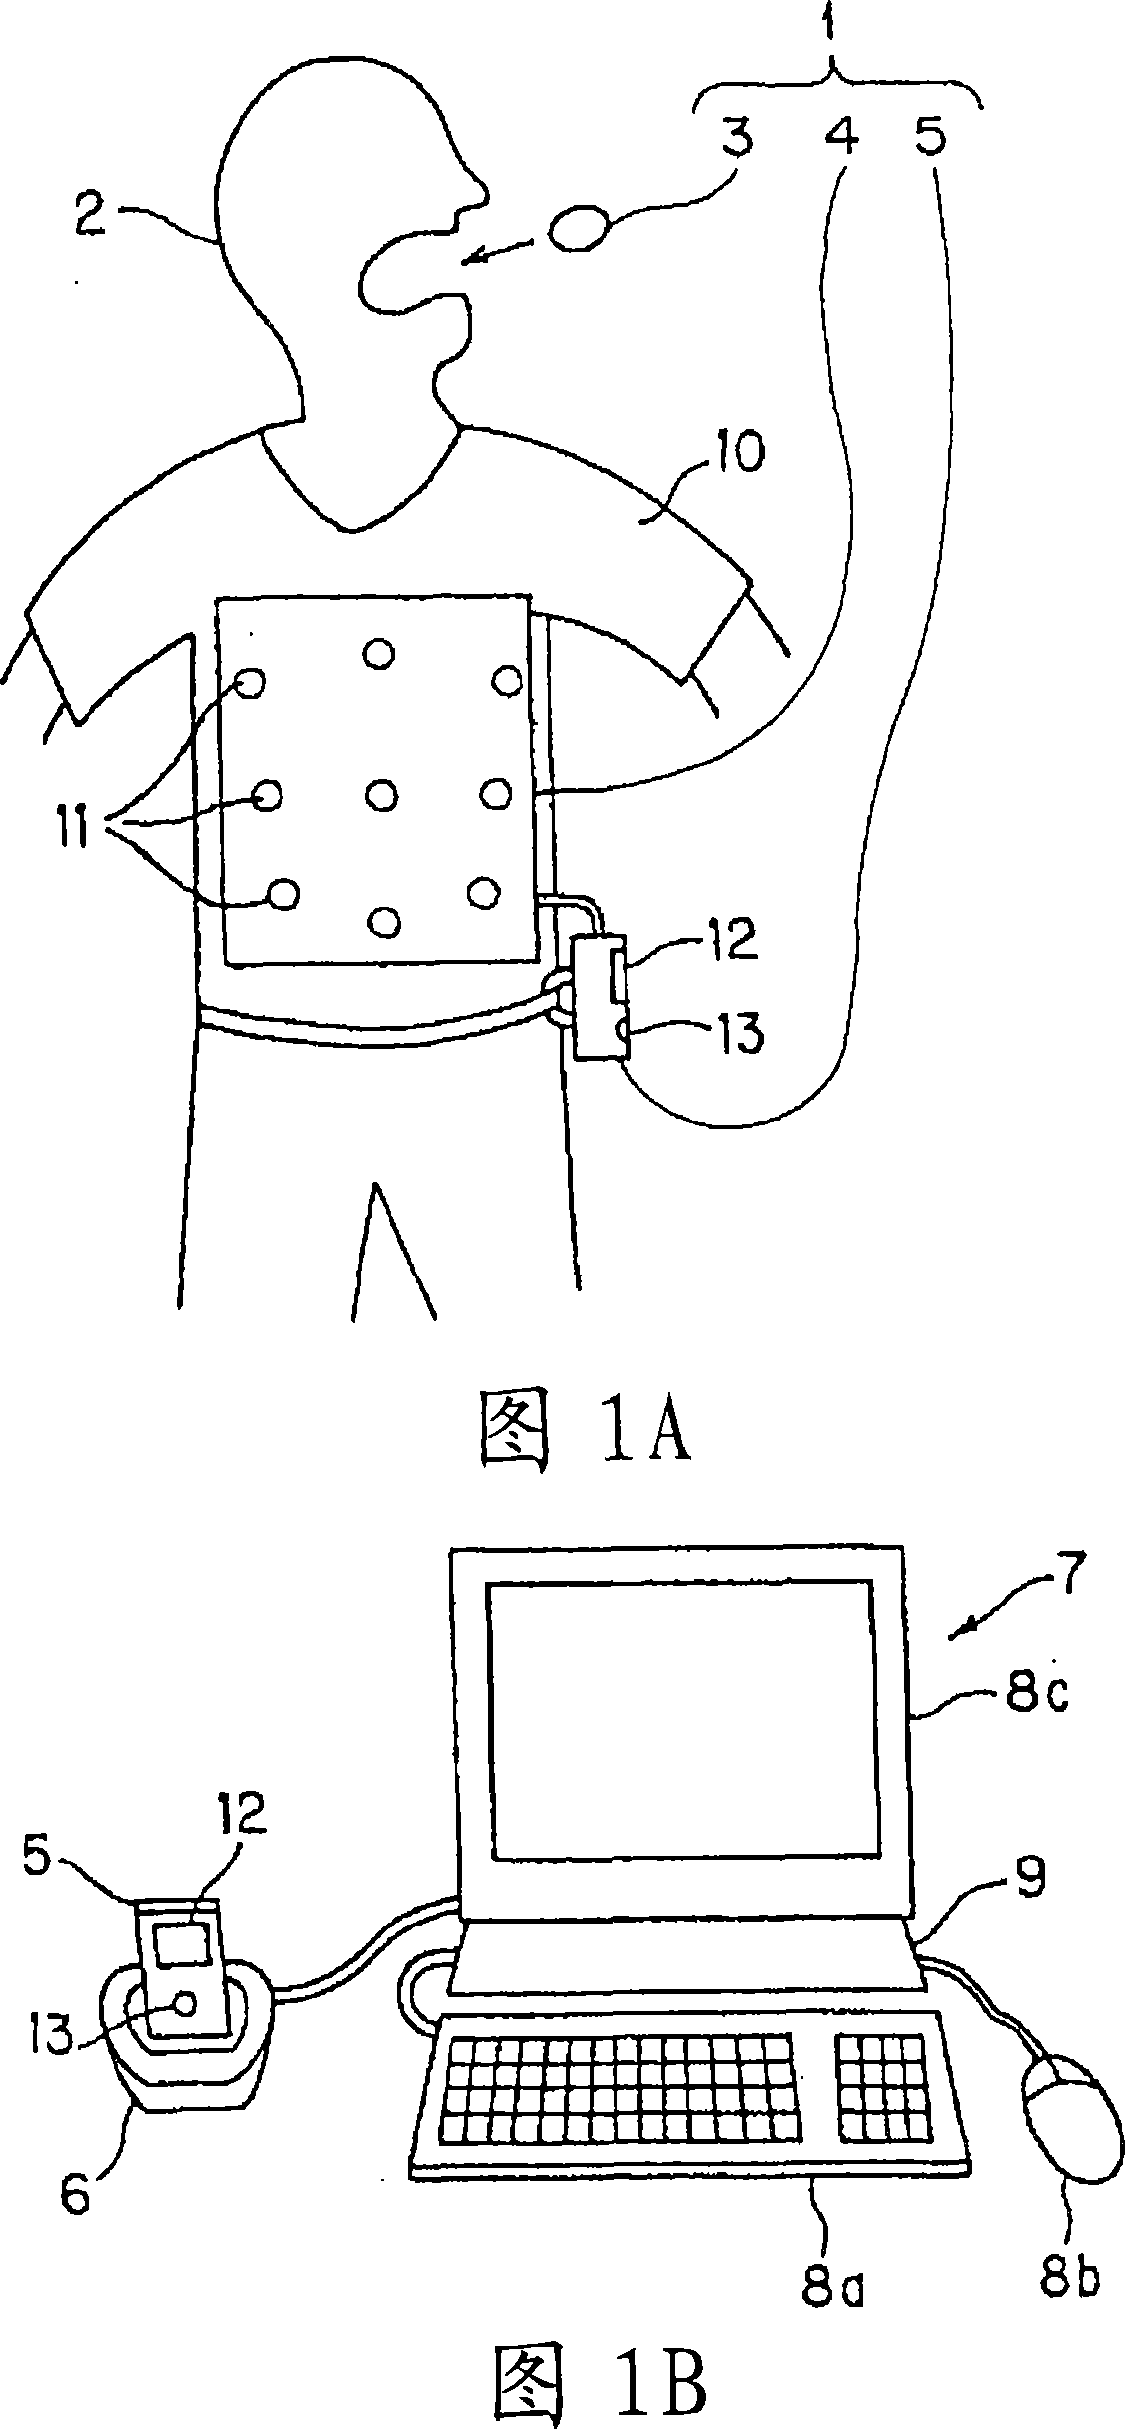 Encapsulated medical device